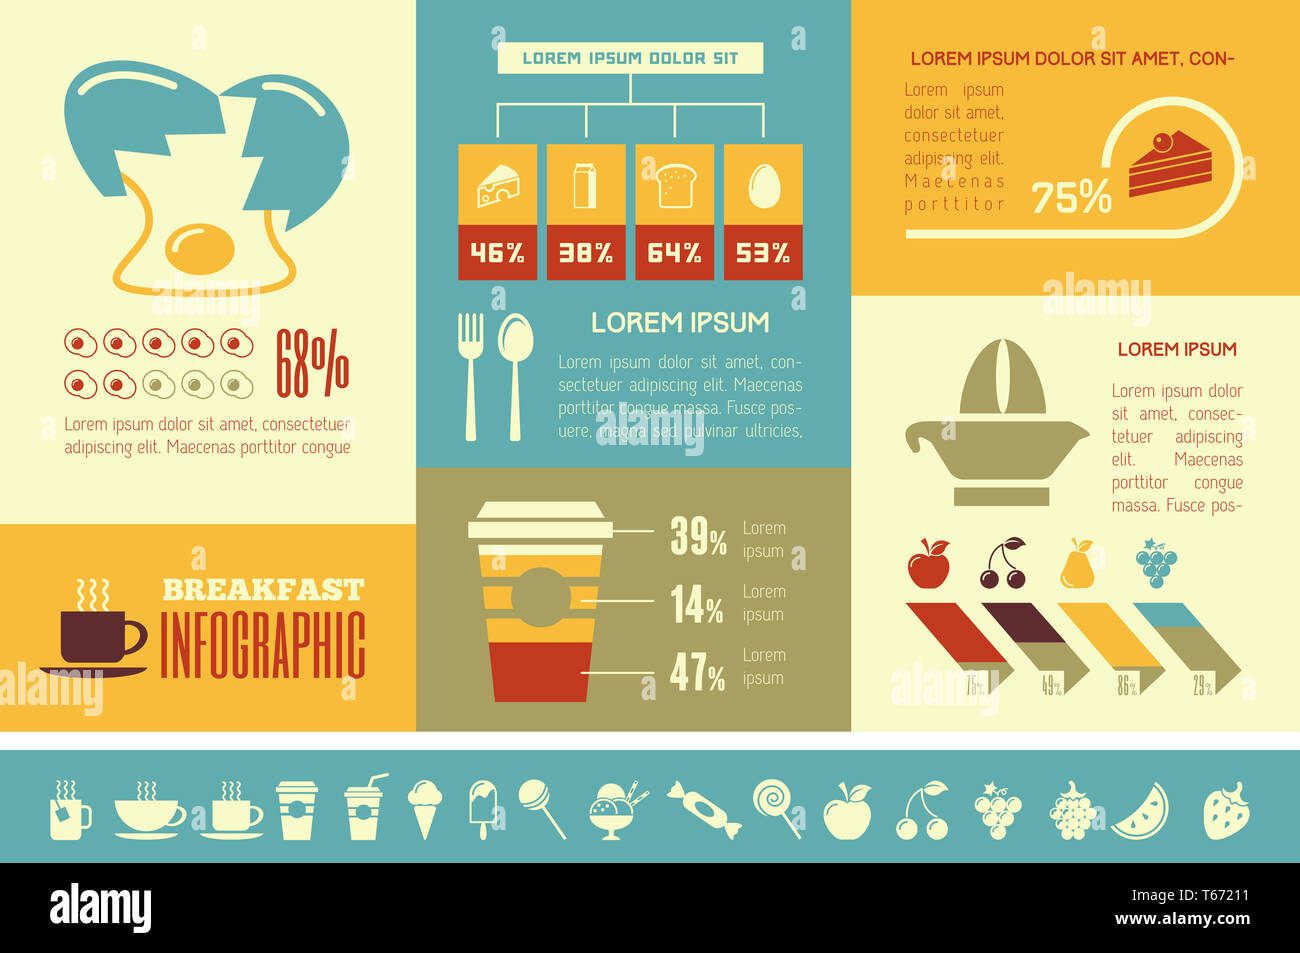 Food Infographic Template Stock Photo - Alamy